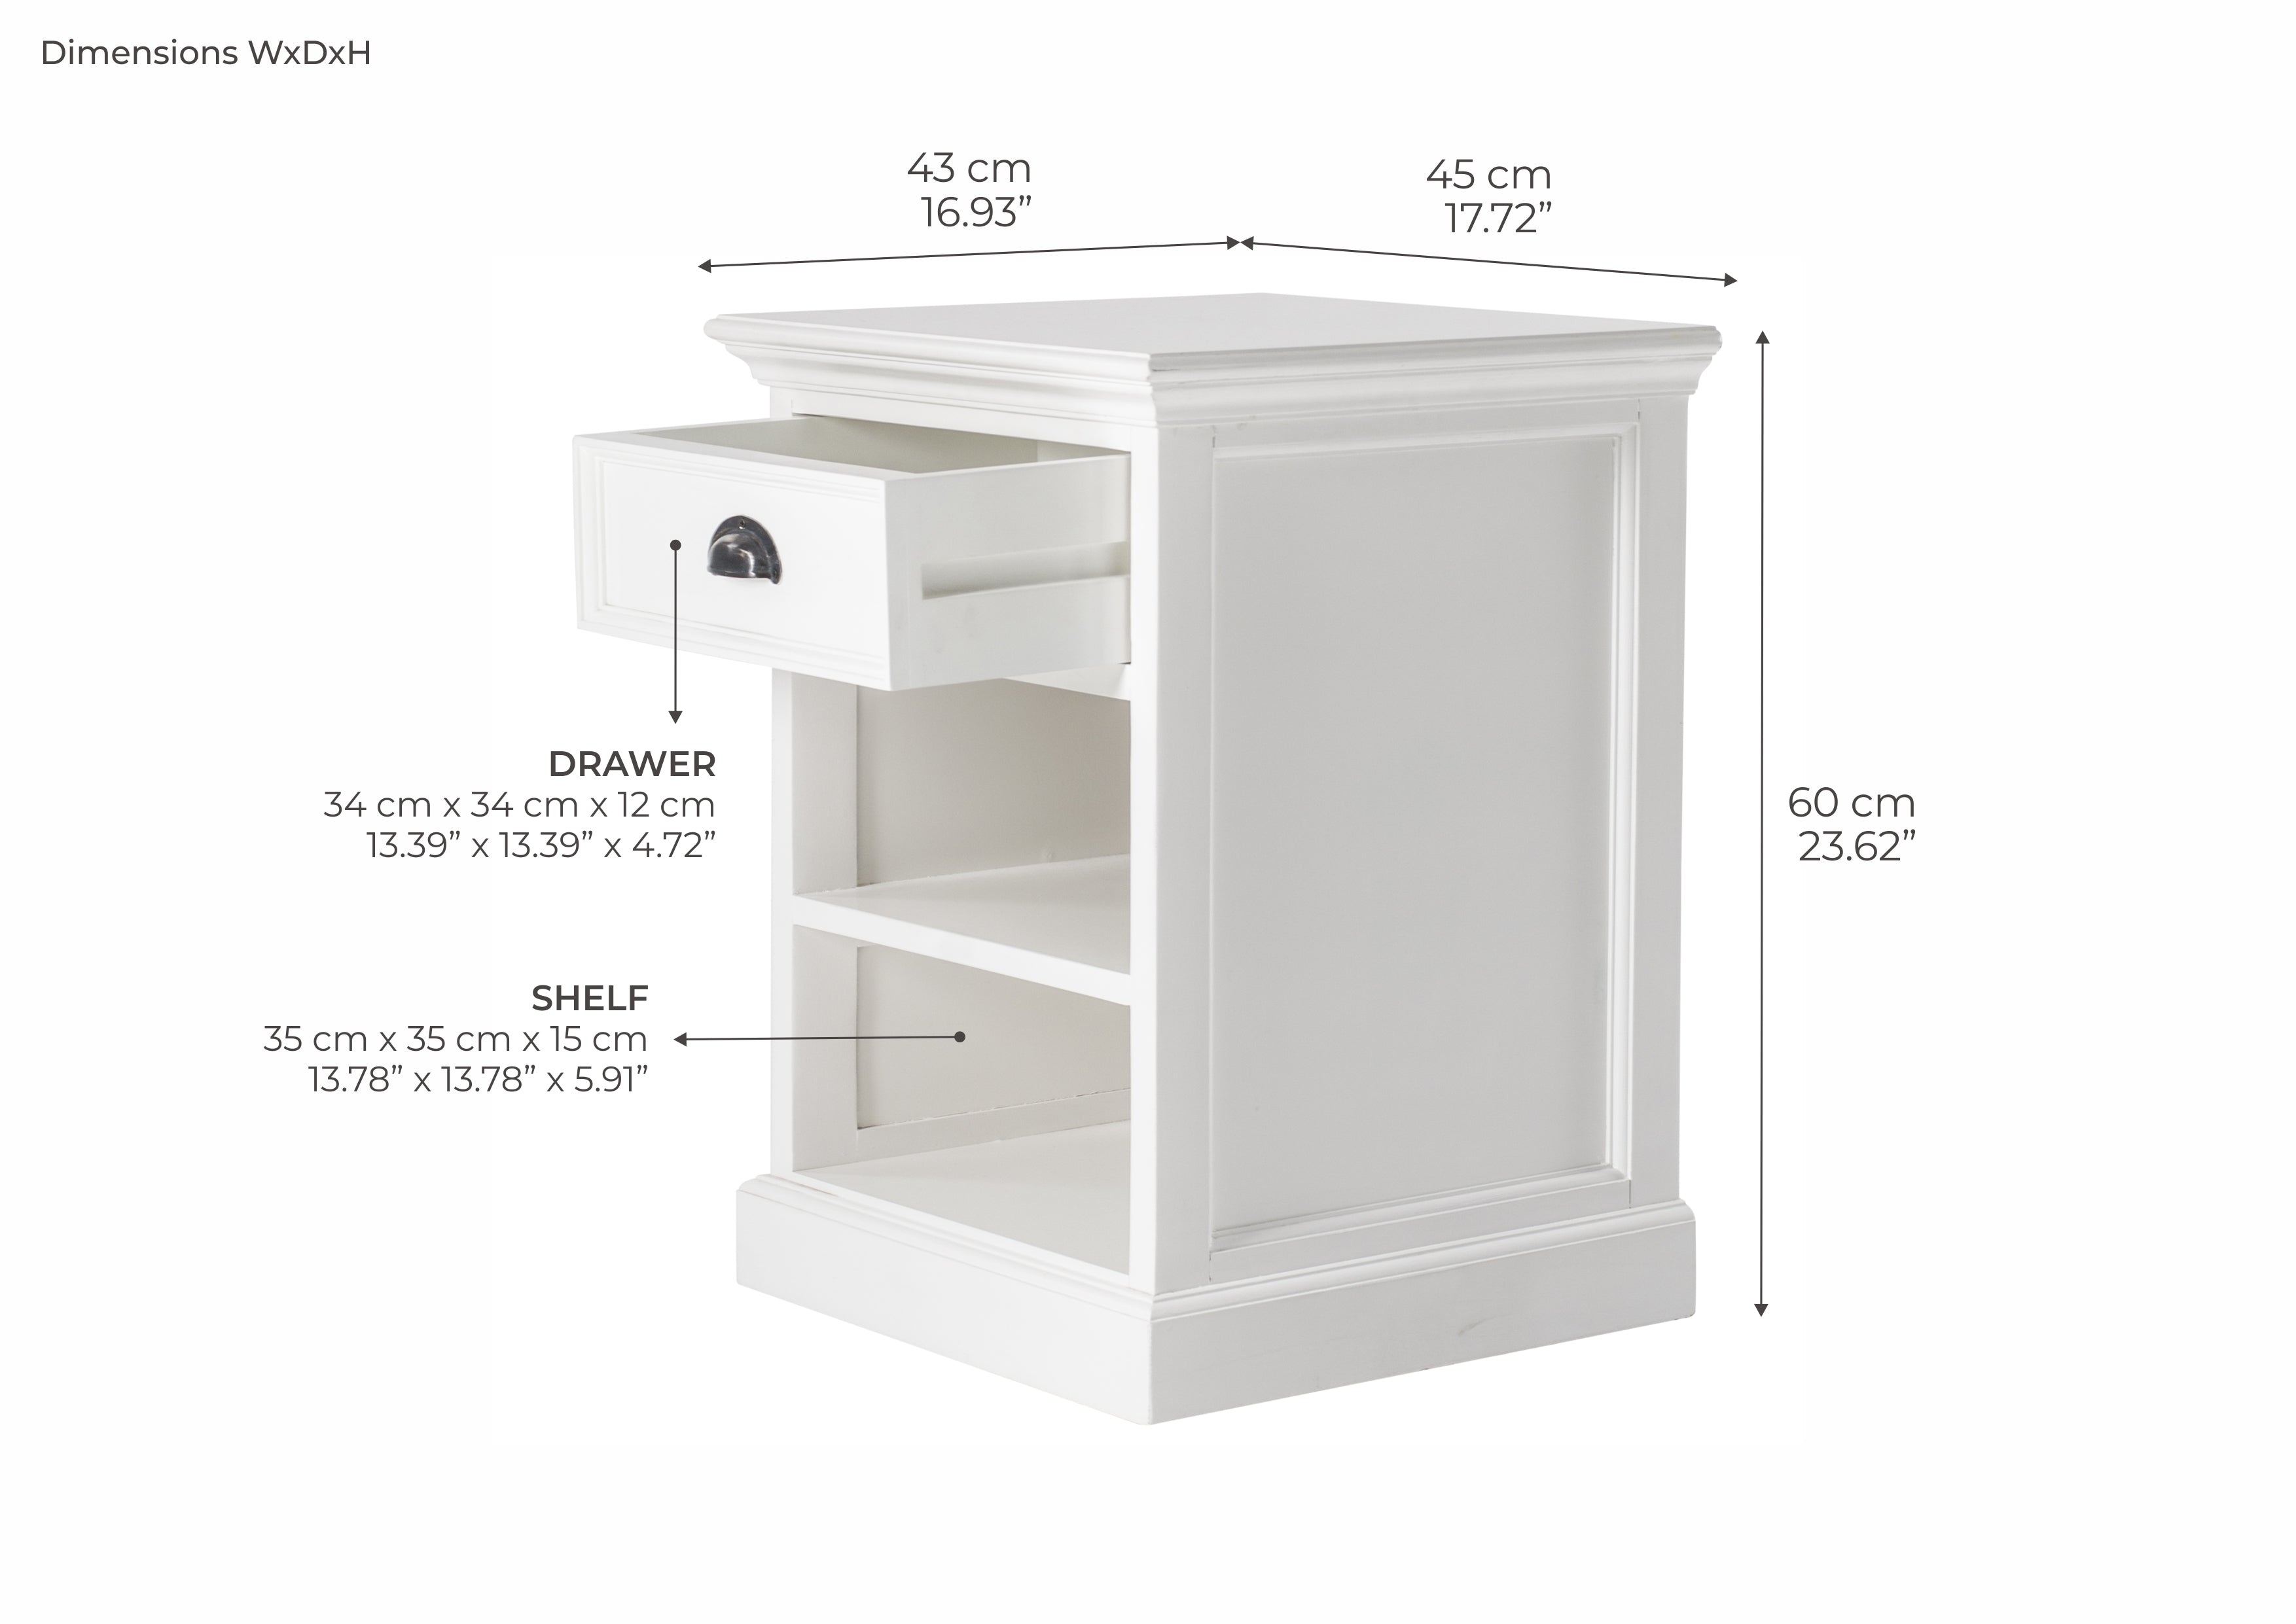 HALIFAX Bedside Table Dimensions